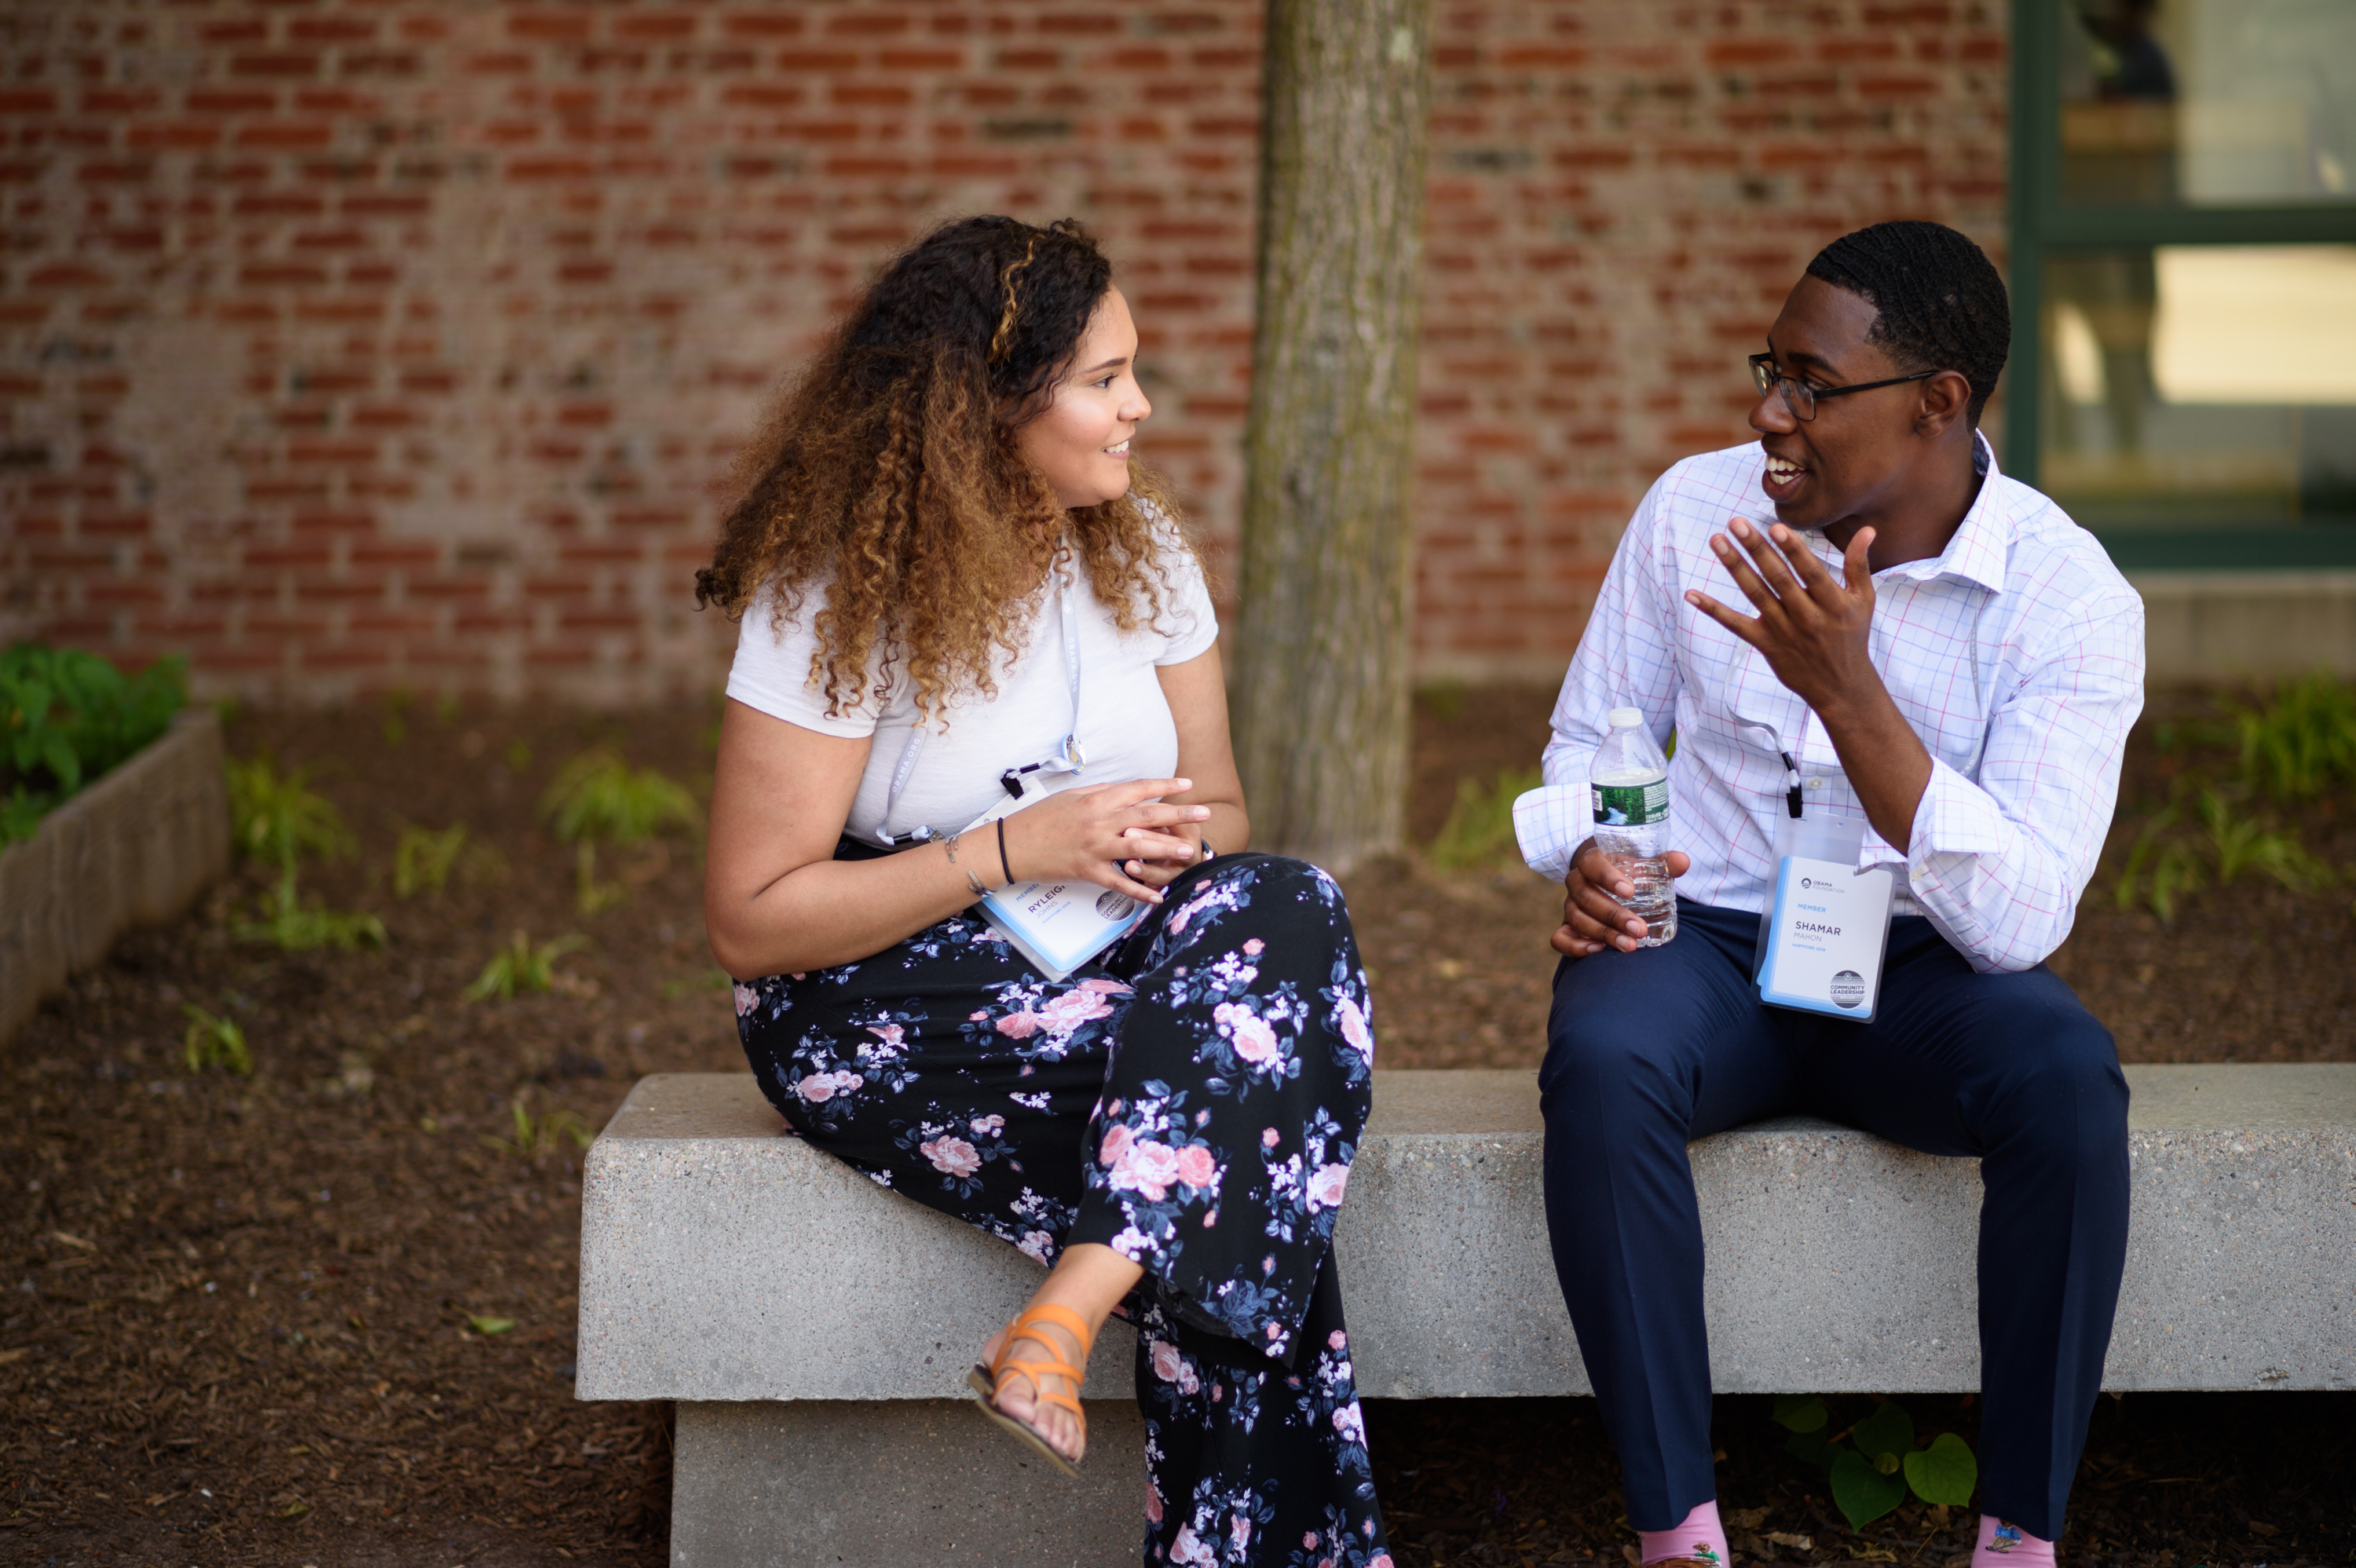 A young man and woman sit in conversation on a park bench.